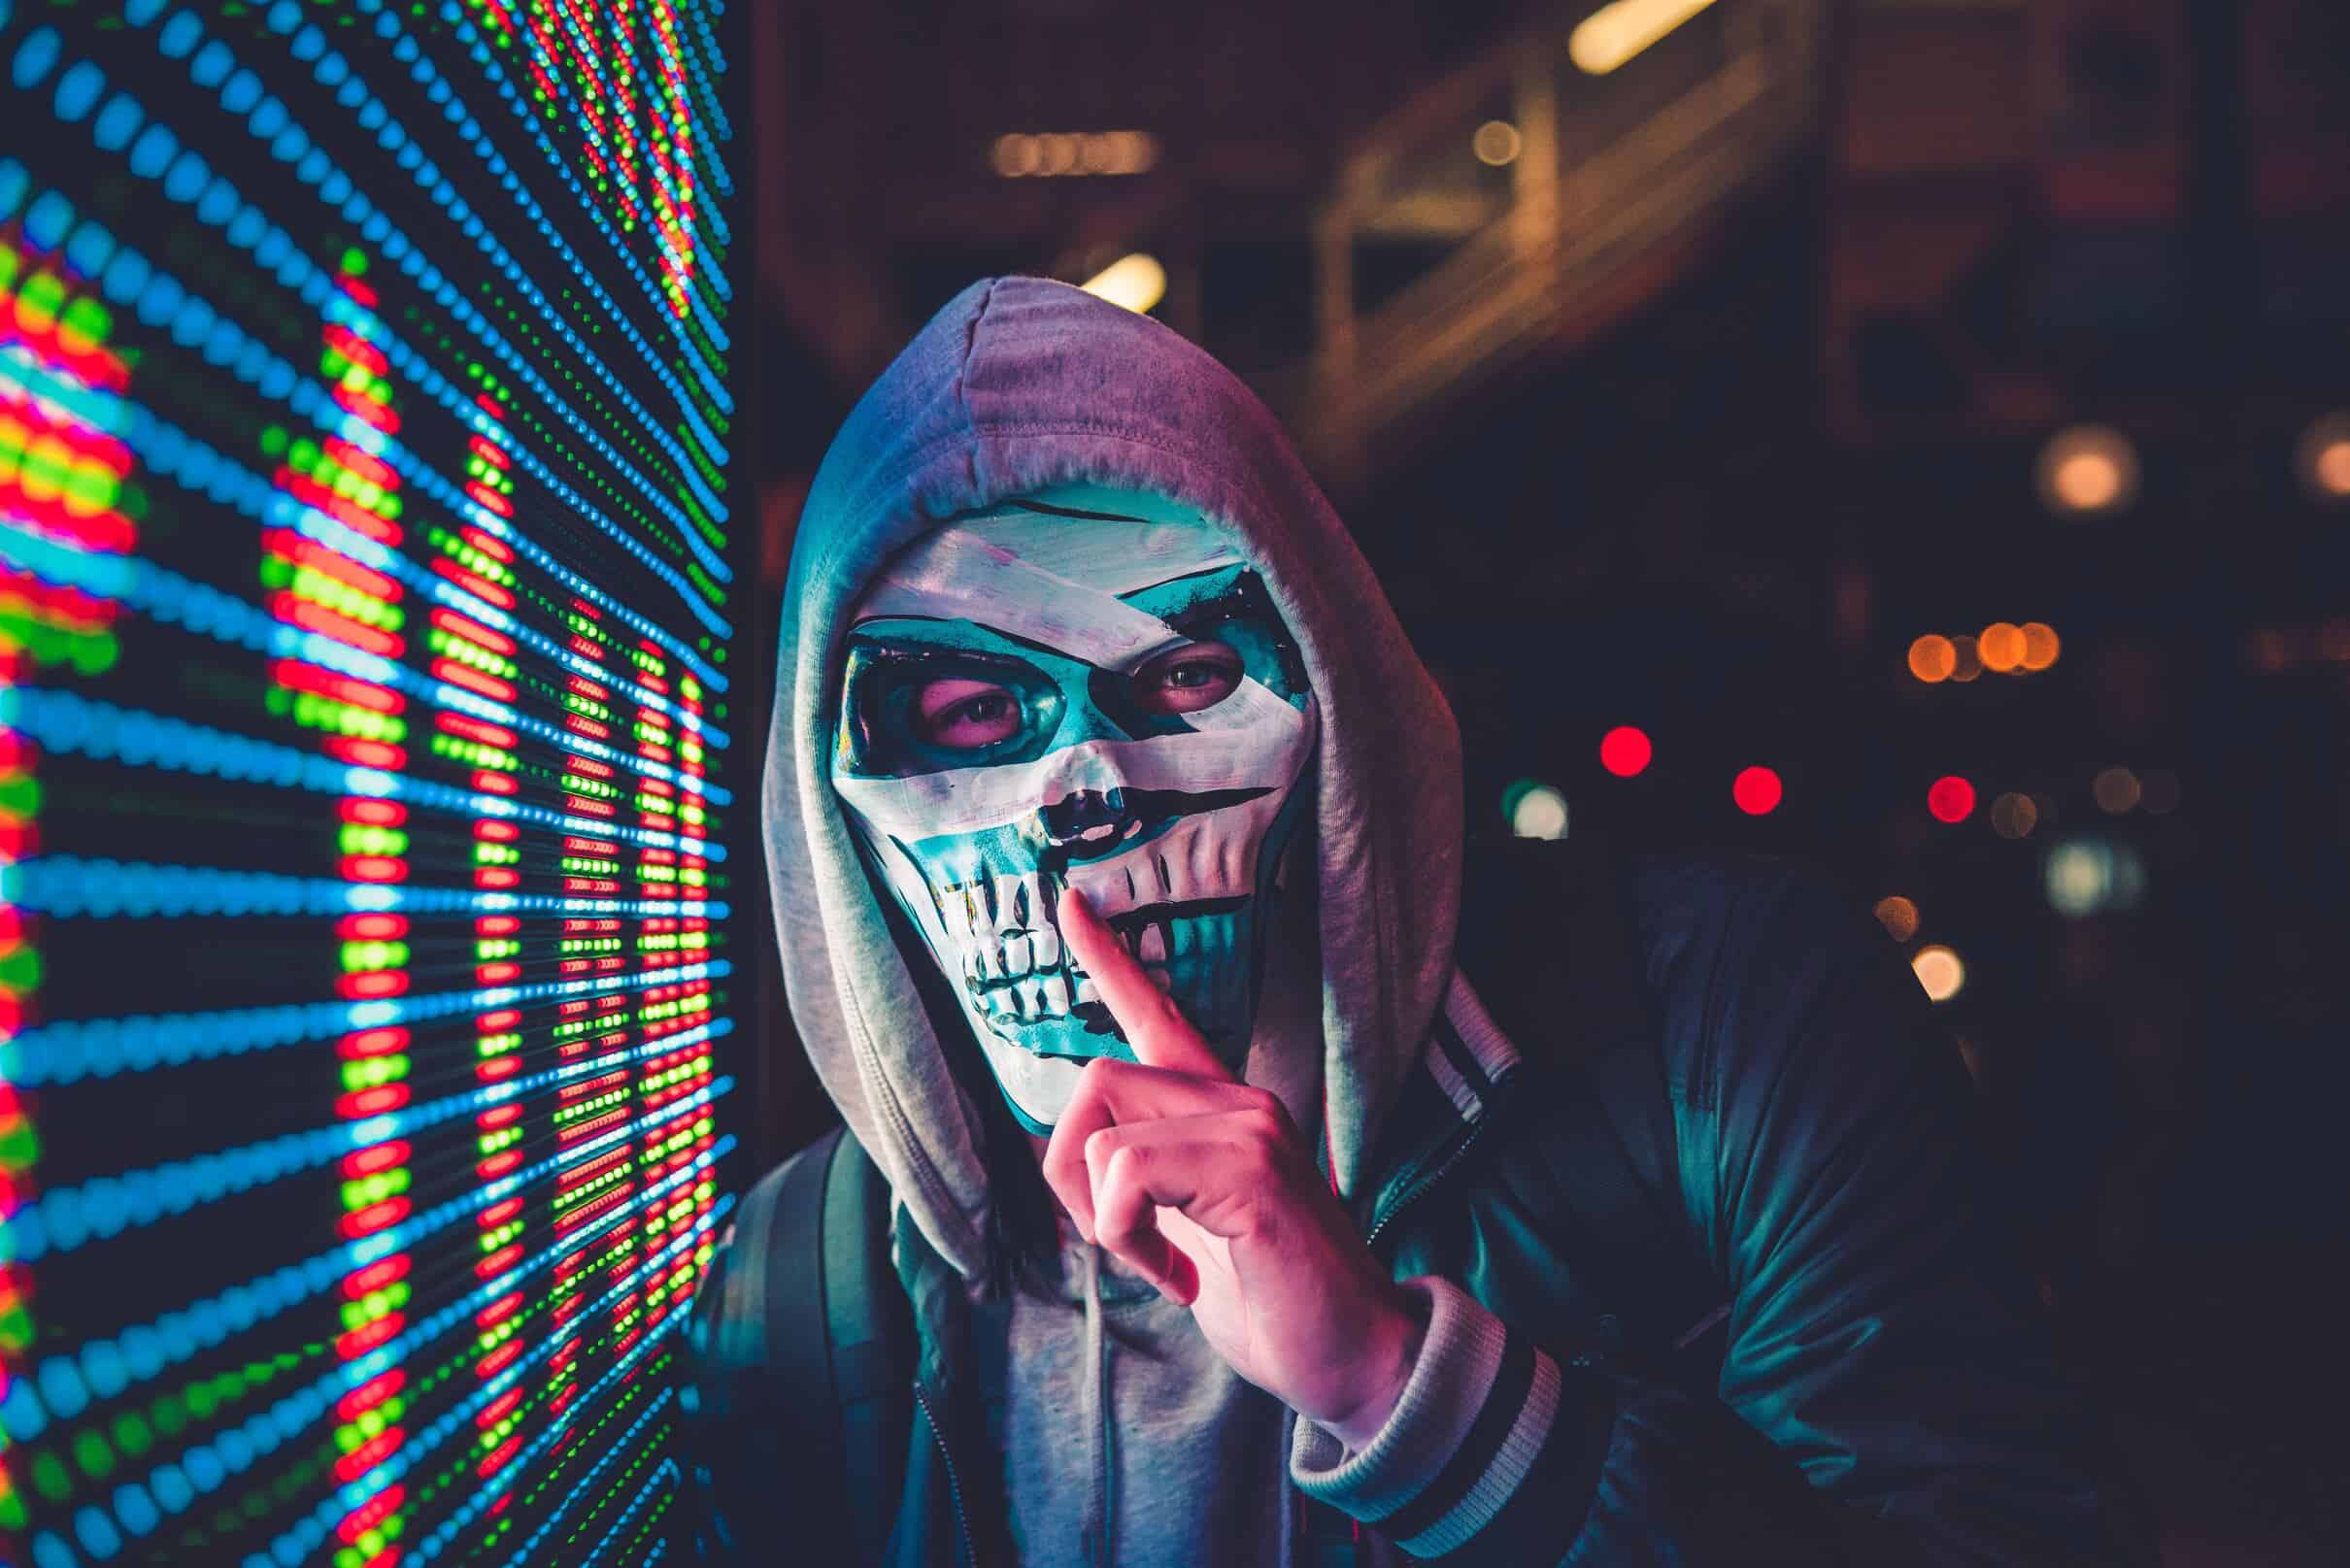 Image depicting a person in front of a computer, posing as a hacker with a hood, typing on a keyboard.